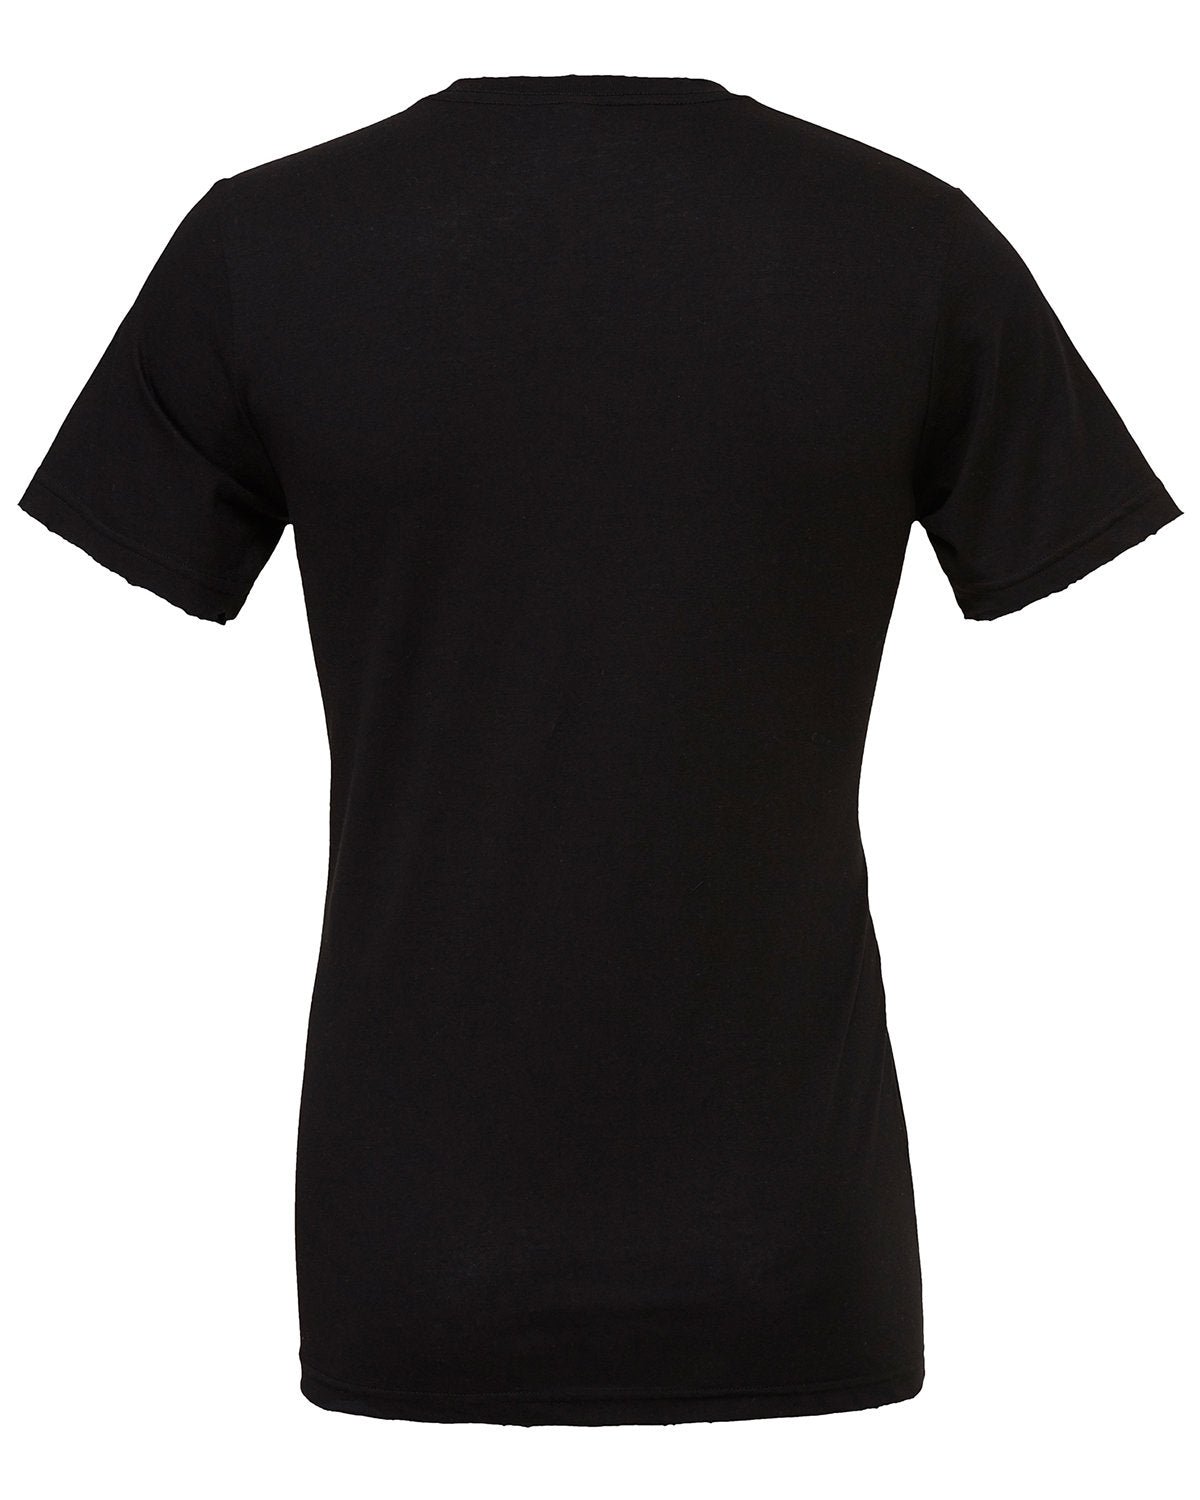 Plain black Bella Canvas t-shirt viewed from the back with a crew neckline and short sleeves. The shirt, suitable for custom embroidery, is displayed on a featureless mannequin against a white background by Show Off Your Threads.